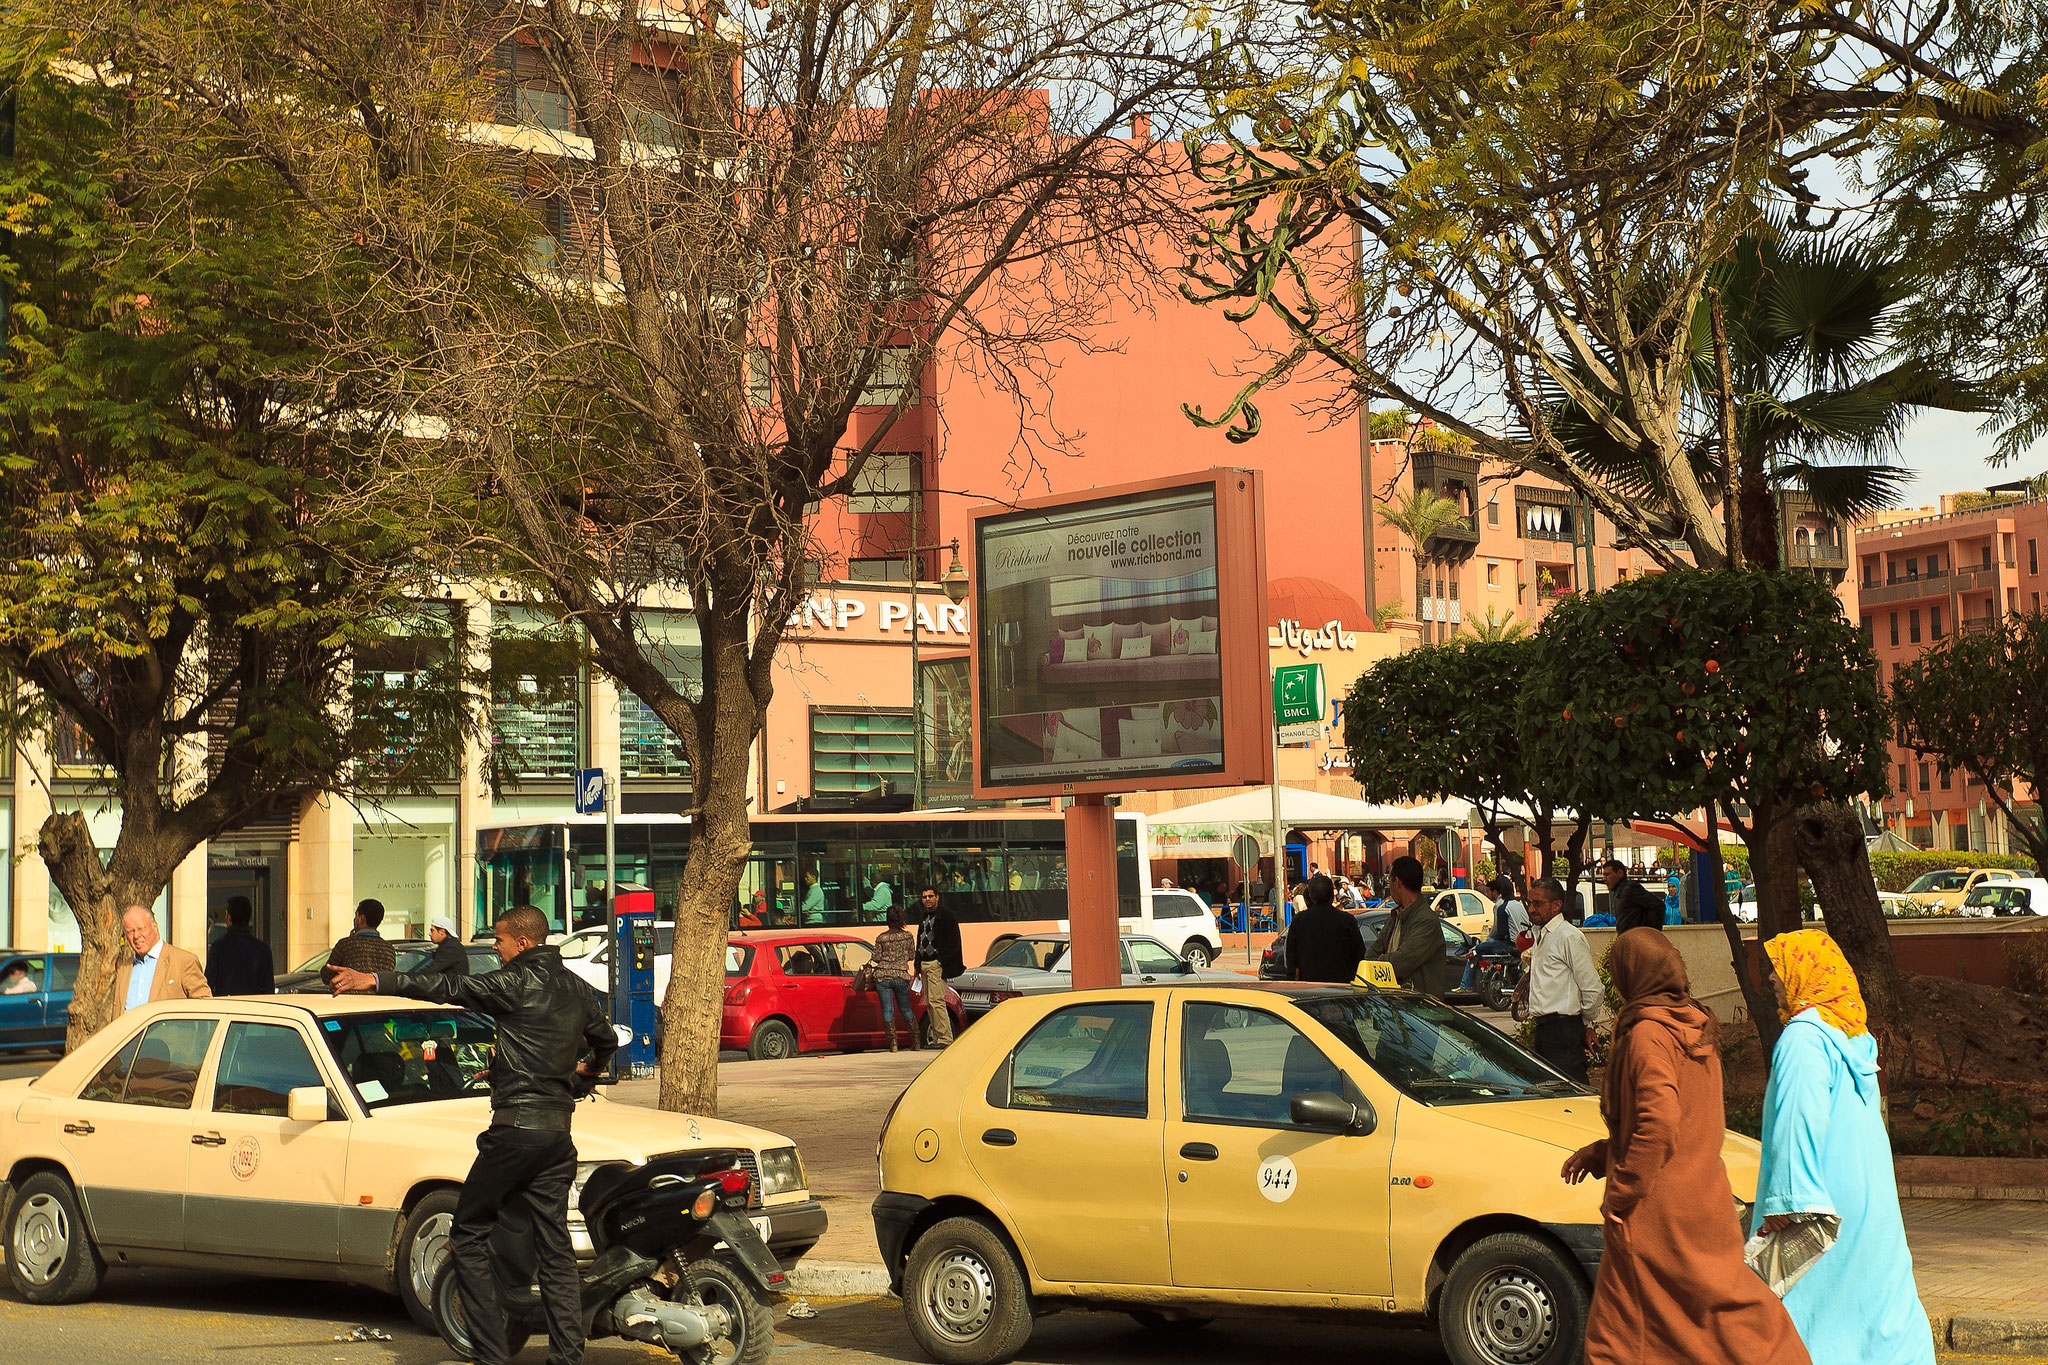 Plaza, shopping area with fashion stores